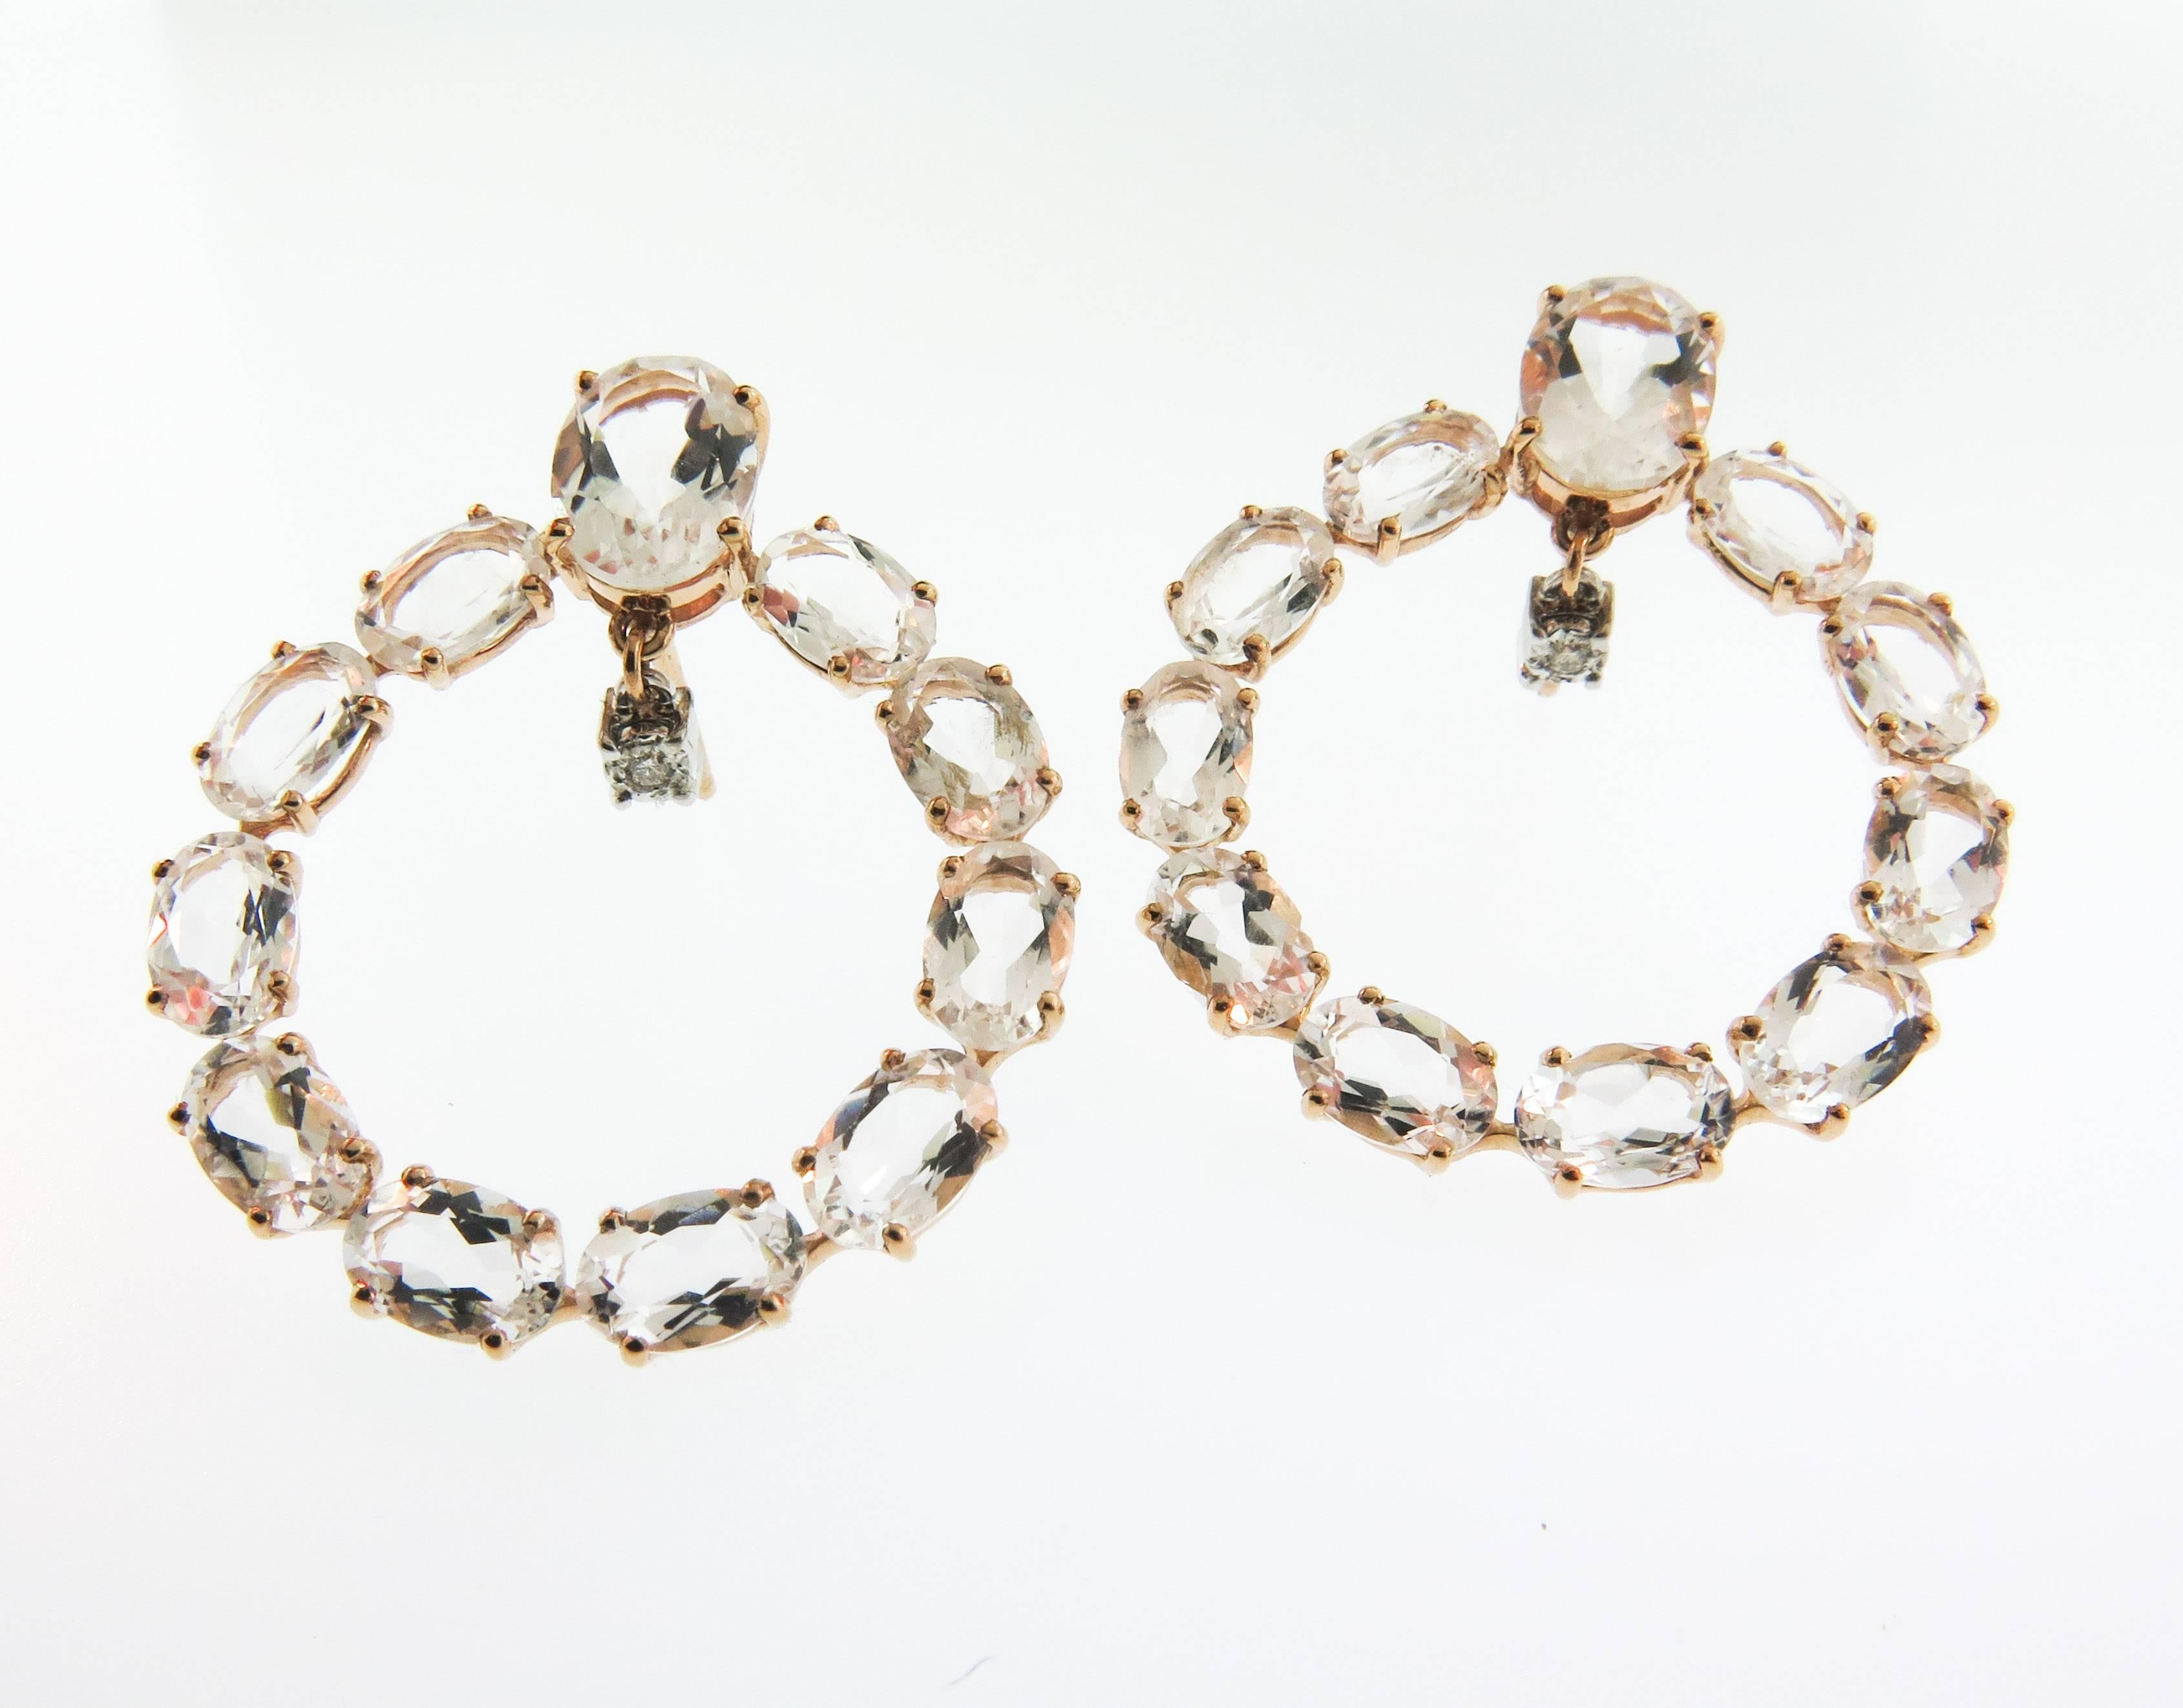 Brumani highlights a bounty of Brazilian gemstones with a unique festive spirit through the delicate pinks of faceted Rose Quartz in the Looping Shine Collection. This pair of earrings are crafted in 18K soft color rose gold with Diamond drop accent